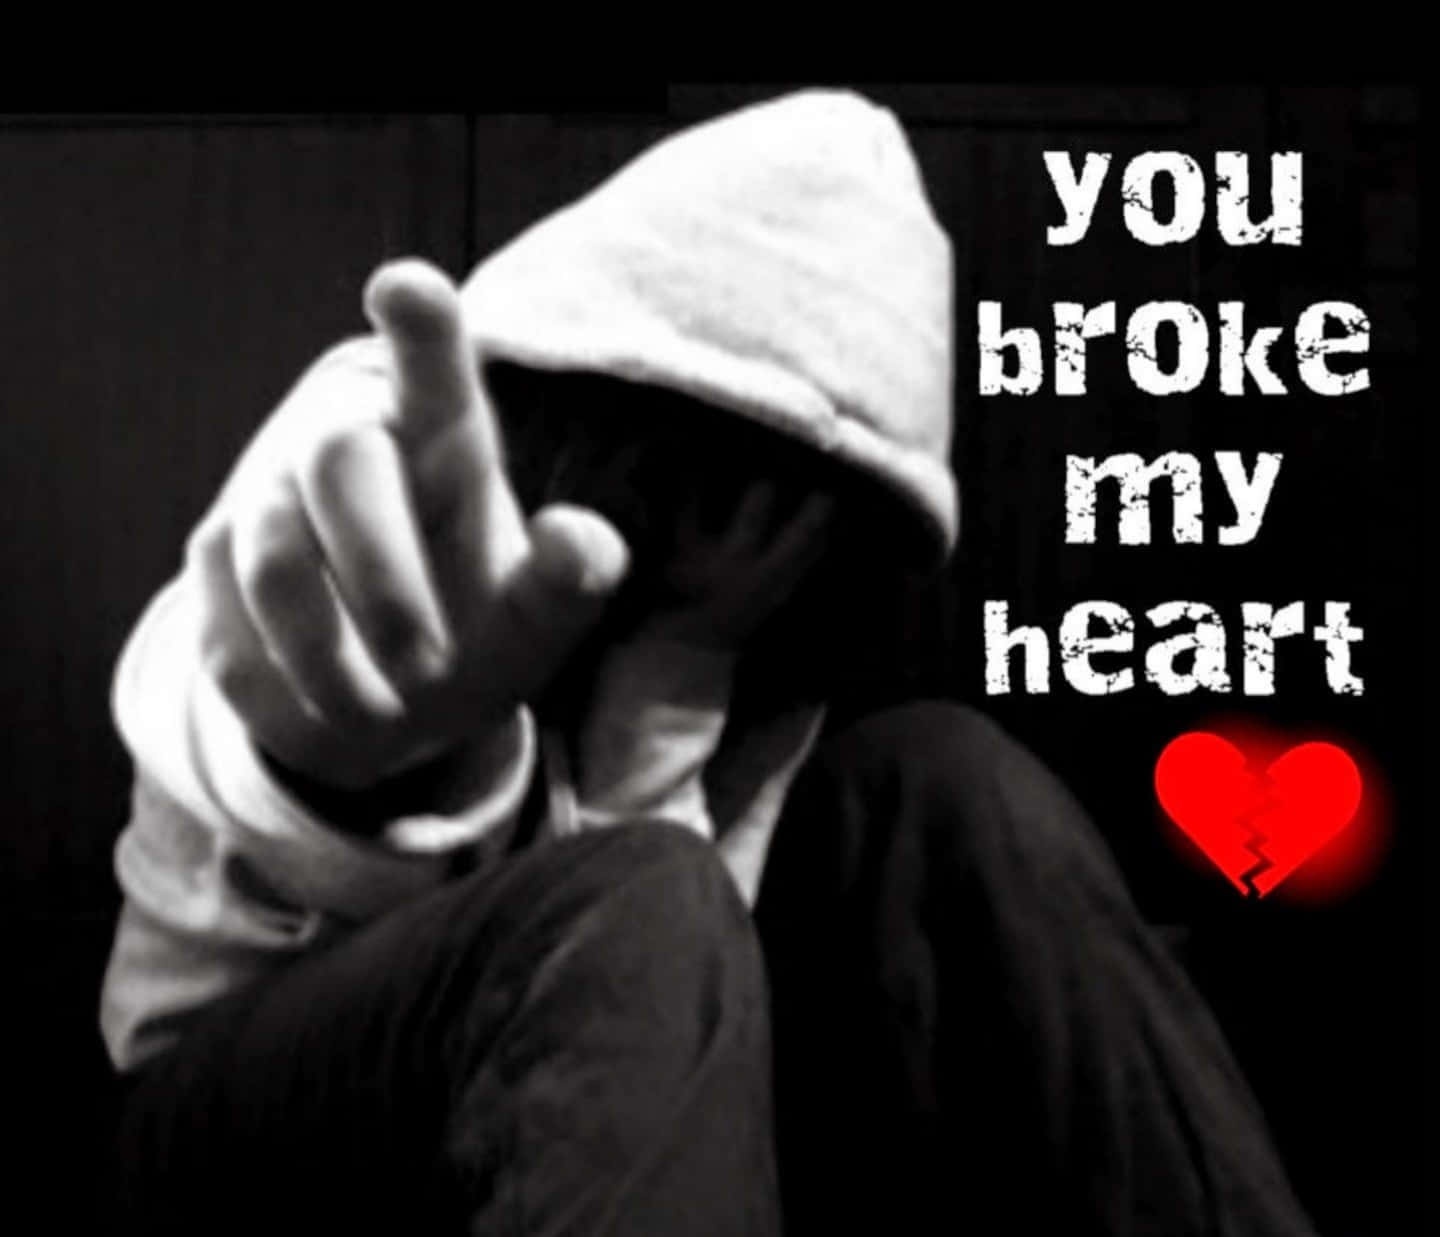 "The pain of a broken heart can be overwhelming"